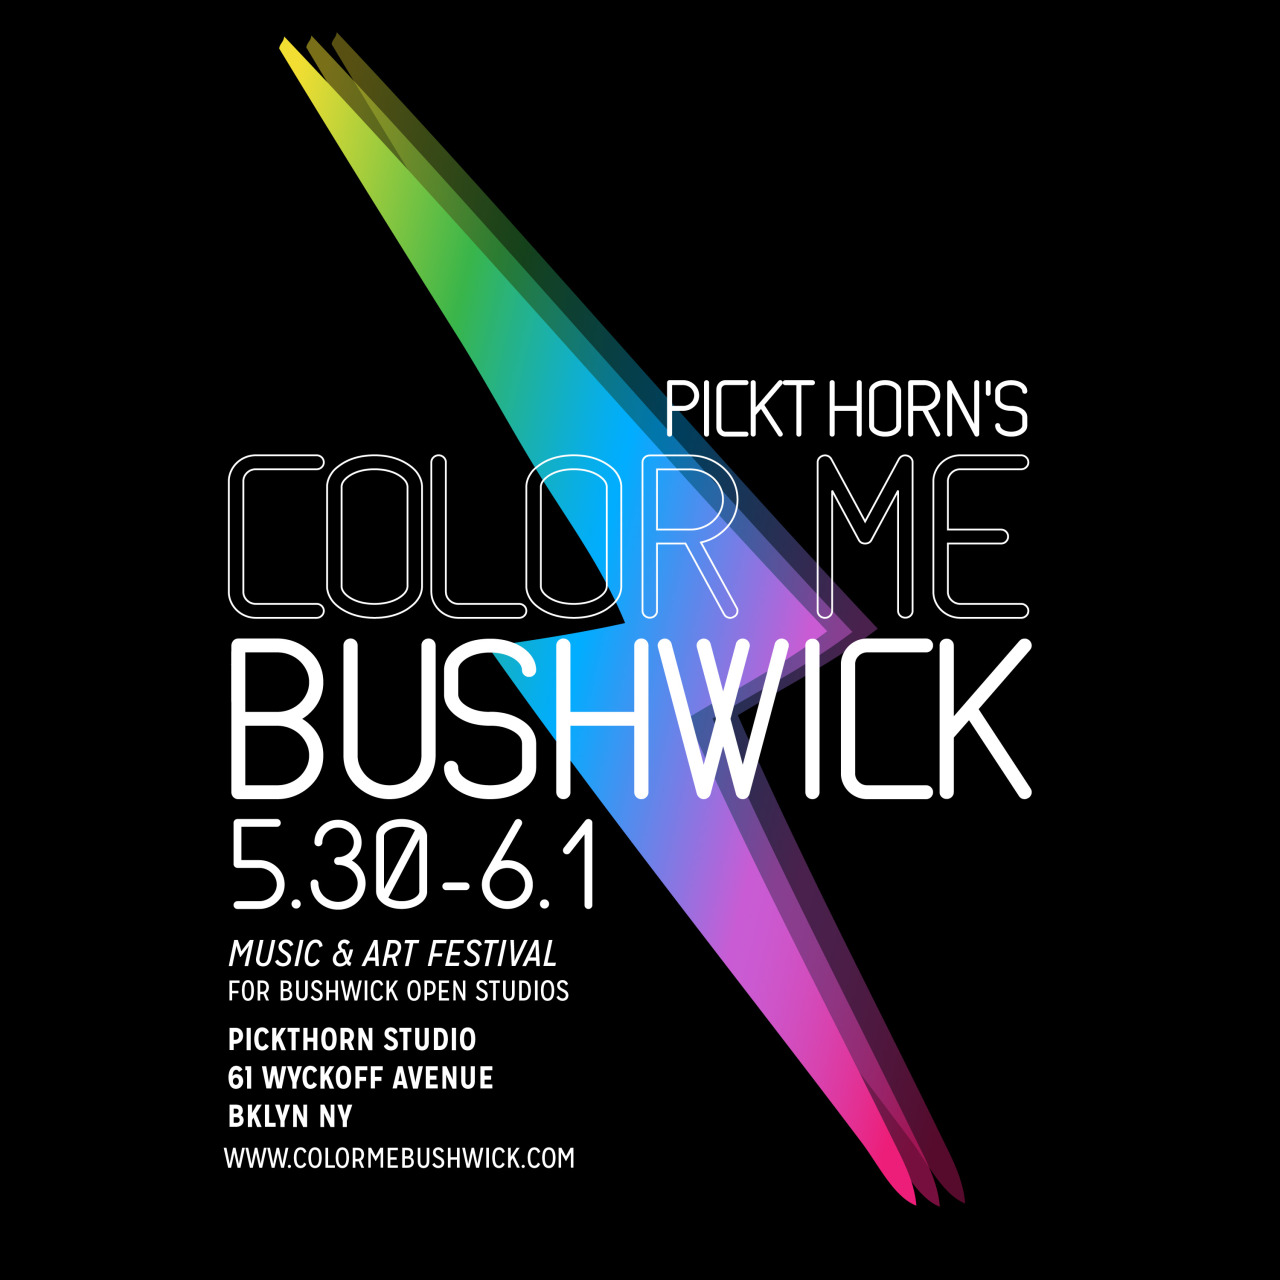 THIS YEAR DURING BUSHWICK OPEN STUDIOS ‘14 [5/30-6/1], PICKTHORN HAIR STUDIO IS HOSTING AN ALL-DAY SENSORY EVENT CALLED “COLOR ME BUSHWICK.”
THE EVENT WILL SHOWCASE MUSIC, ART AND FOOD + DRINK TASTINGS BY CLEARING OUT THE STUDIO AND INVITING THE...